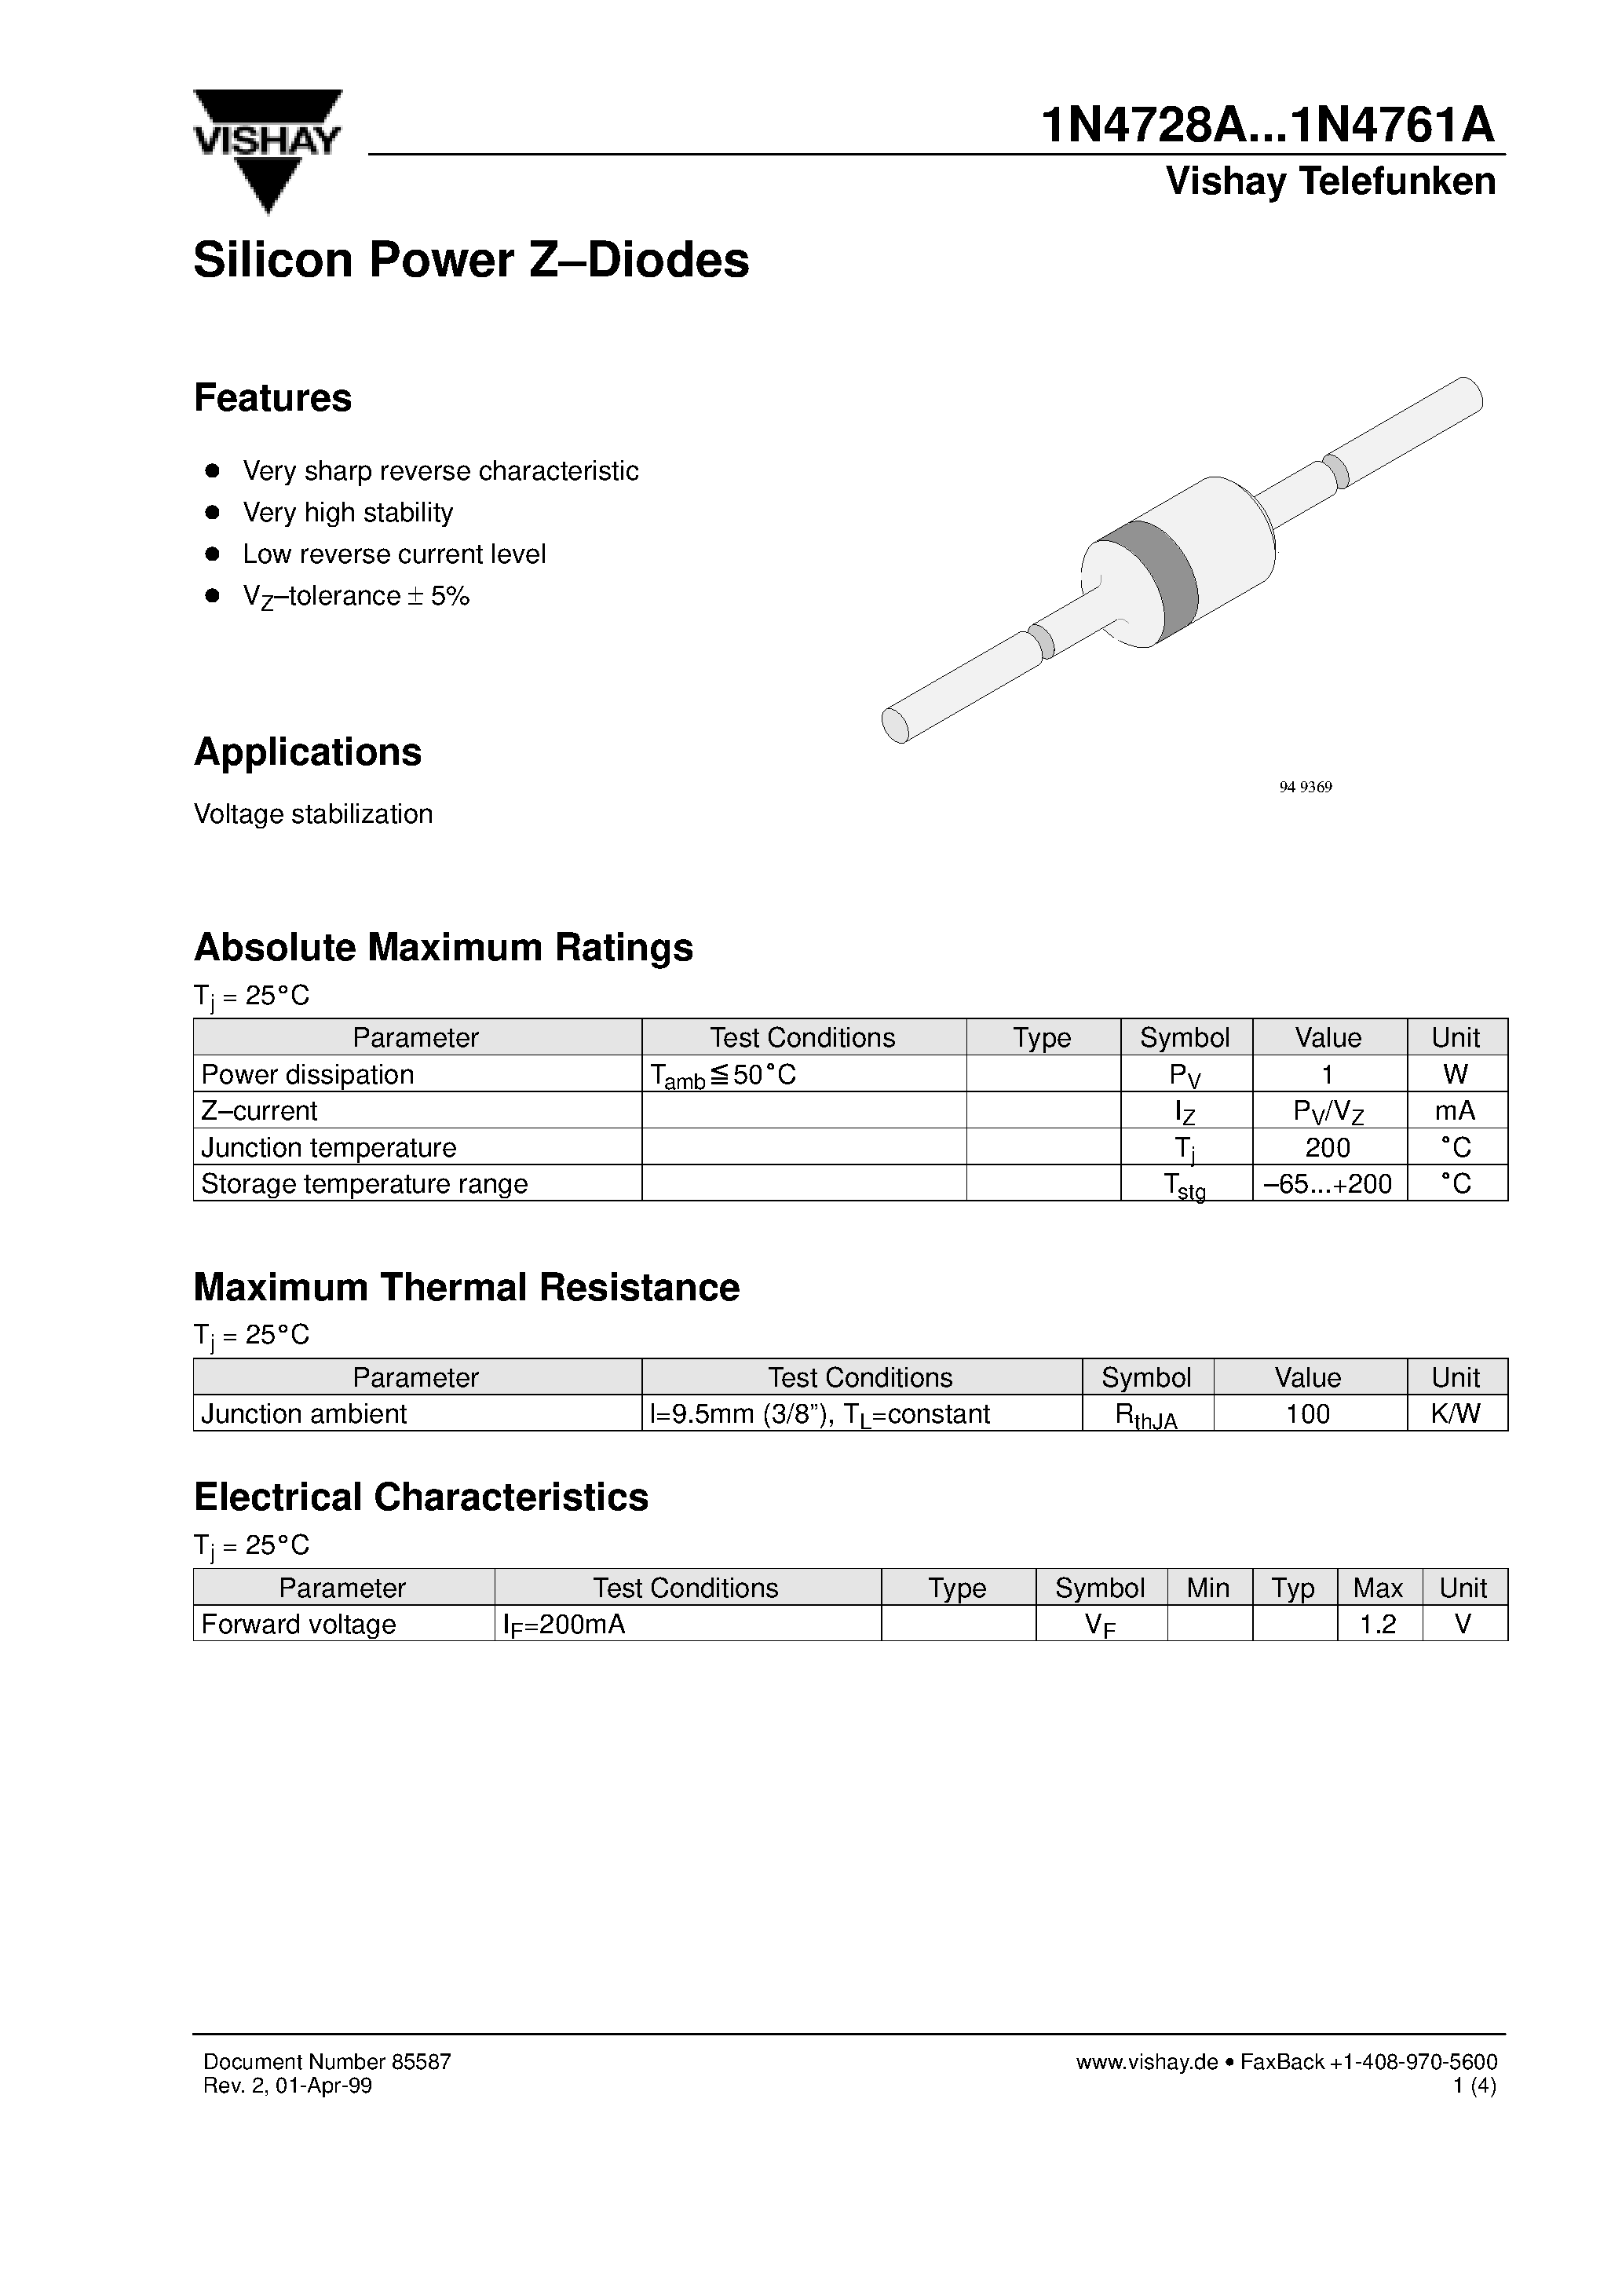 Даташит 1N4743A - Silicon Power Z-Diodes страница 1